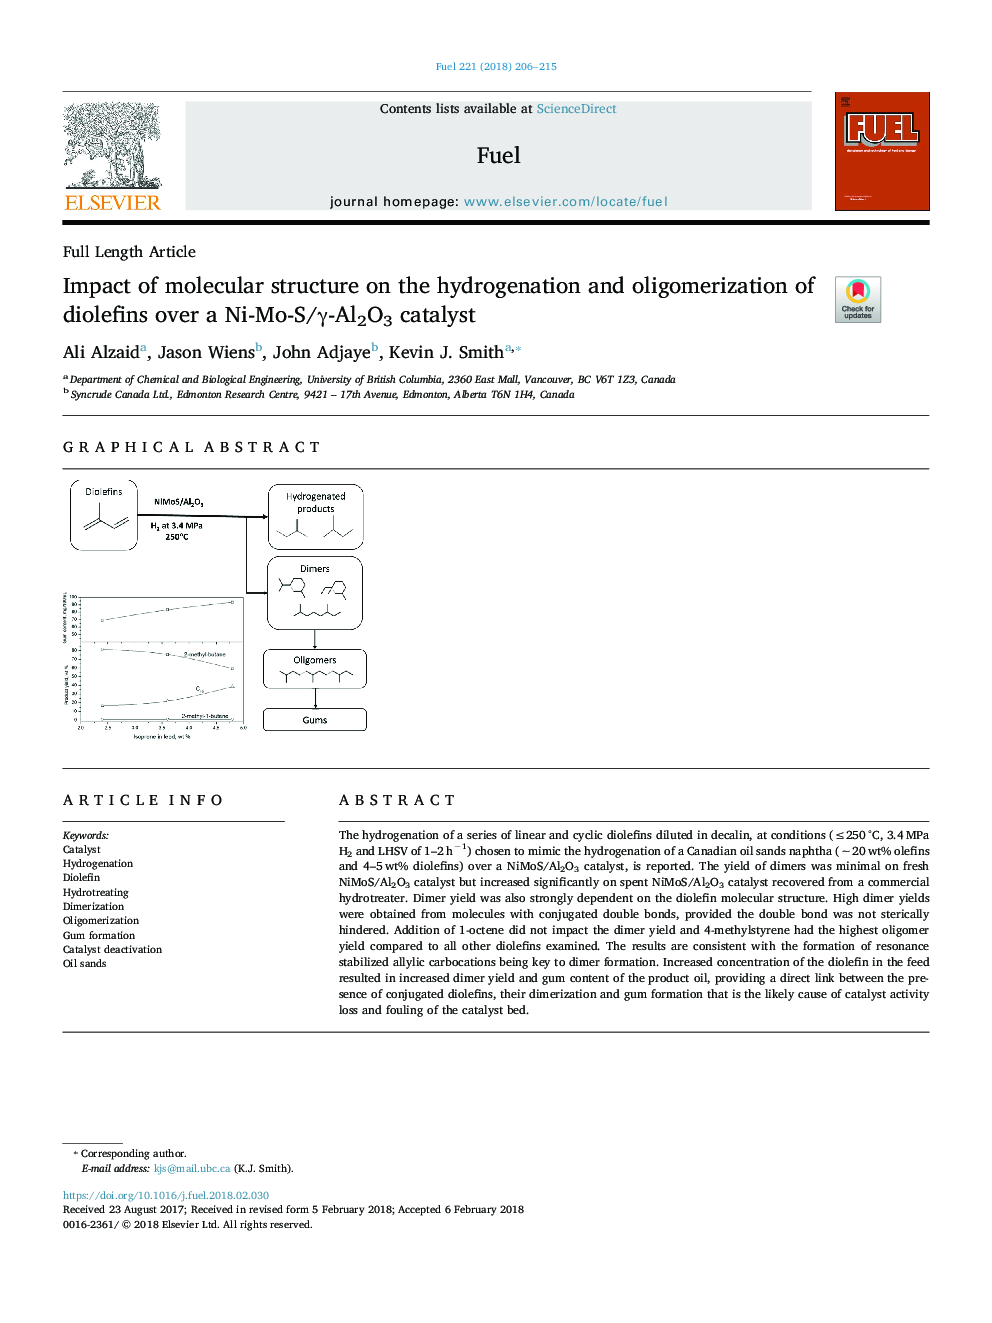 Impact of molecular structure on the hydrogenation and oligomerization of diolefins over a Ni-Mo-S/Î³-Al2O3 catalyst